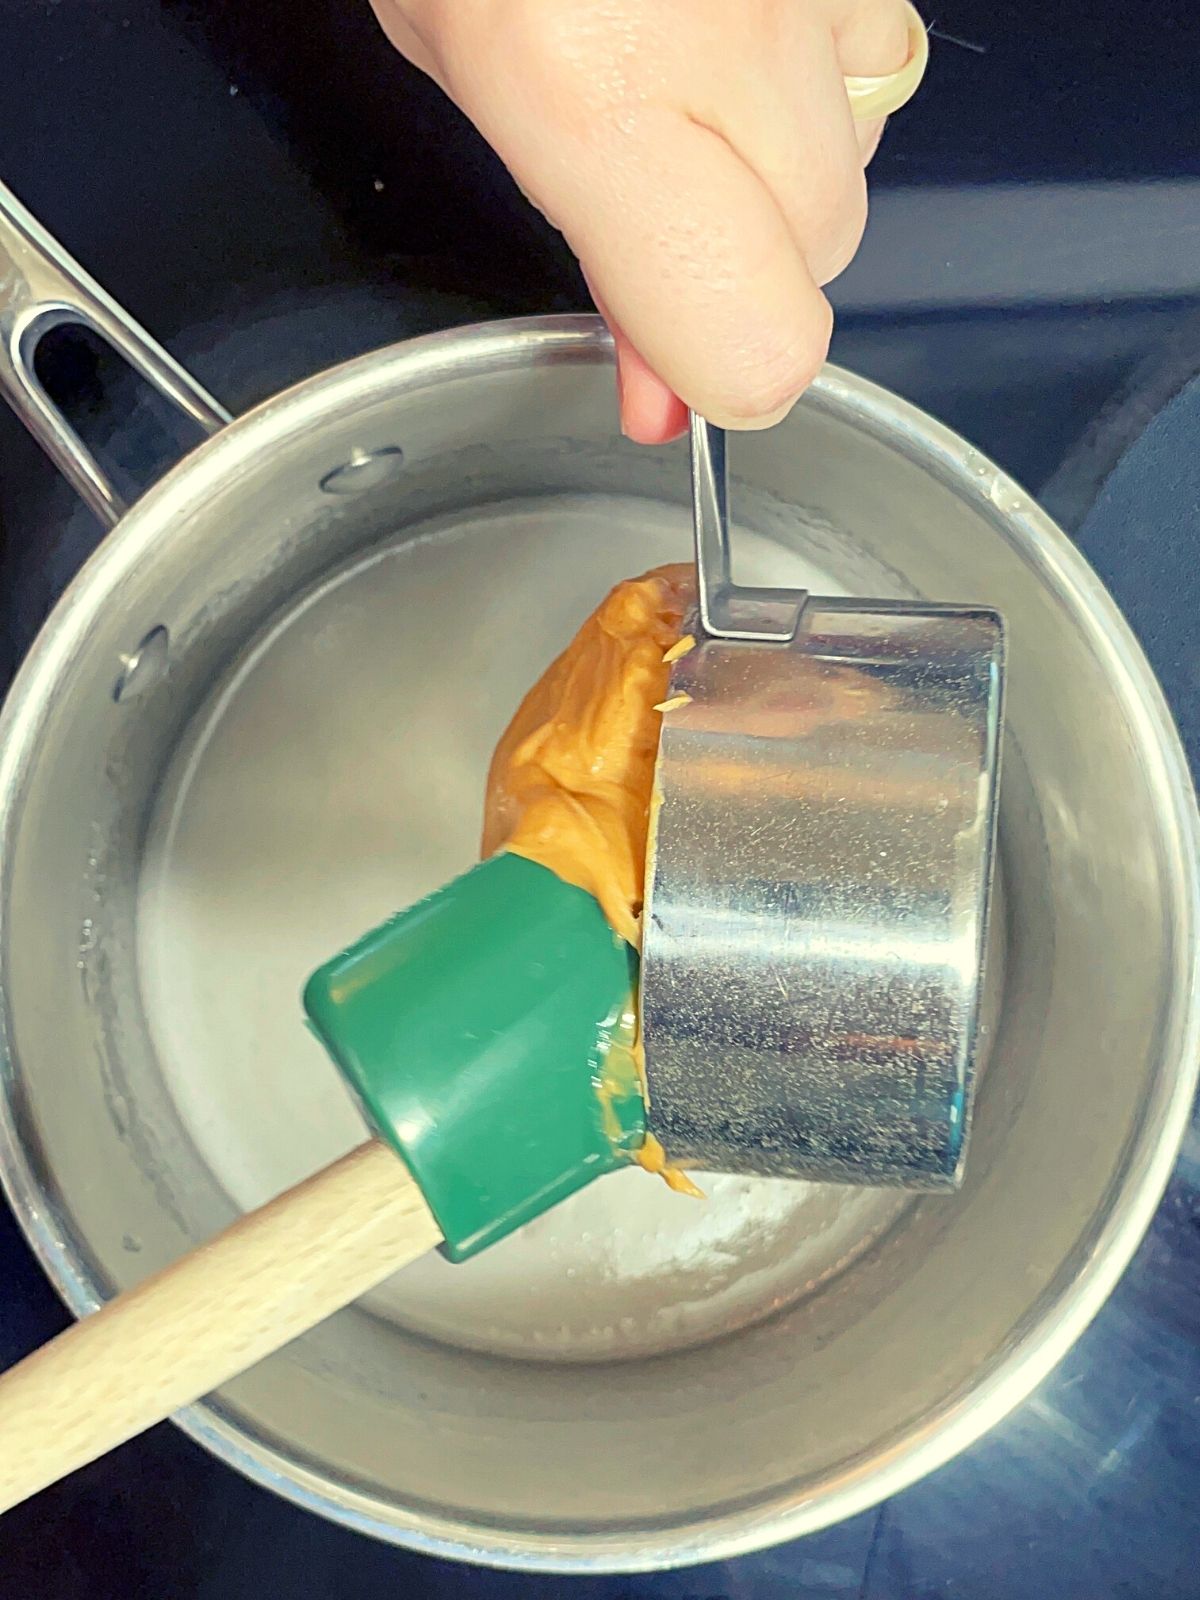 Adding peanut butter to a saucepan filled with hot corn syrup and sugar mixture.